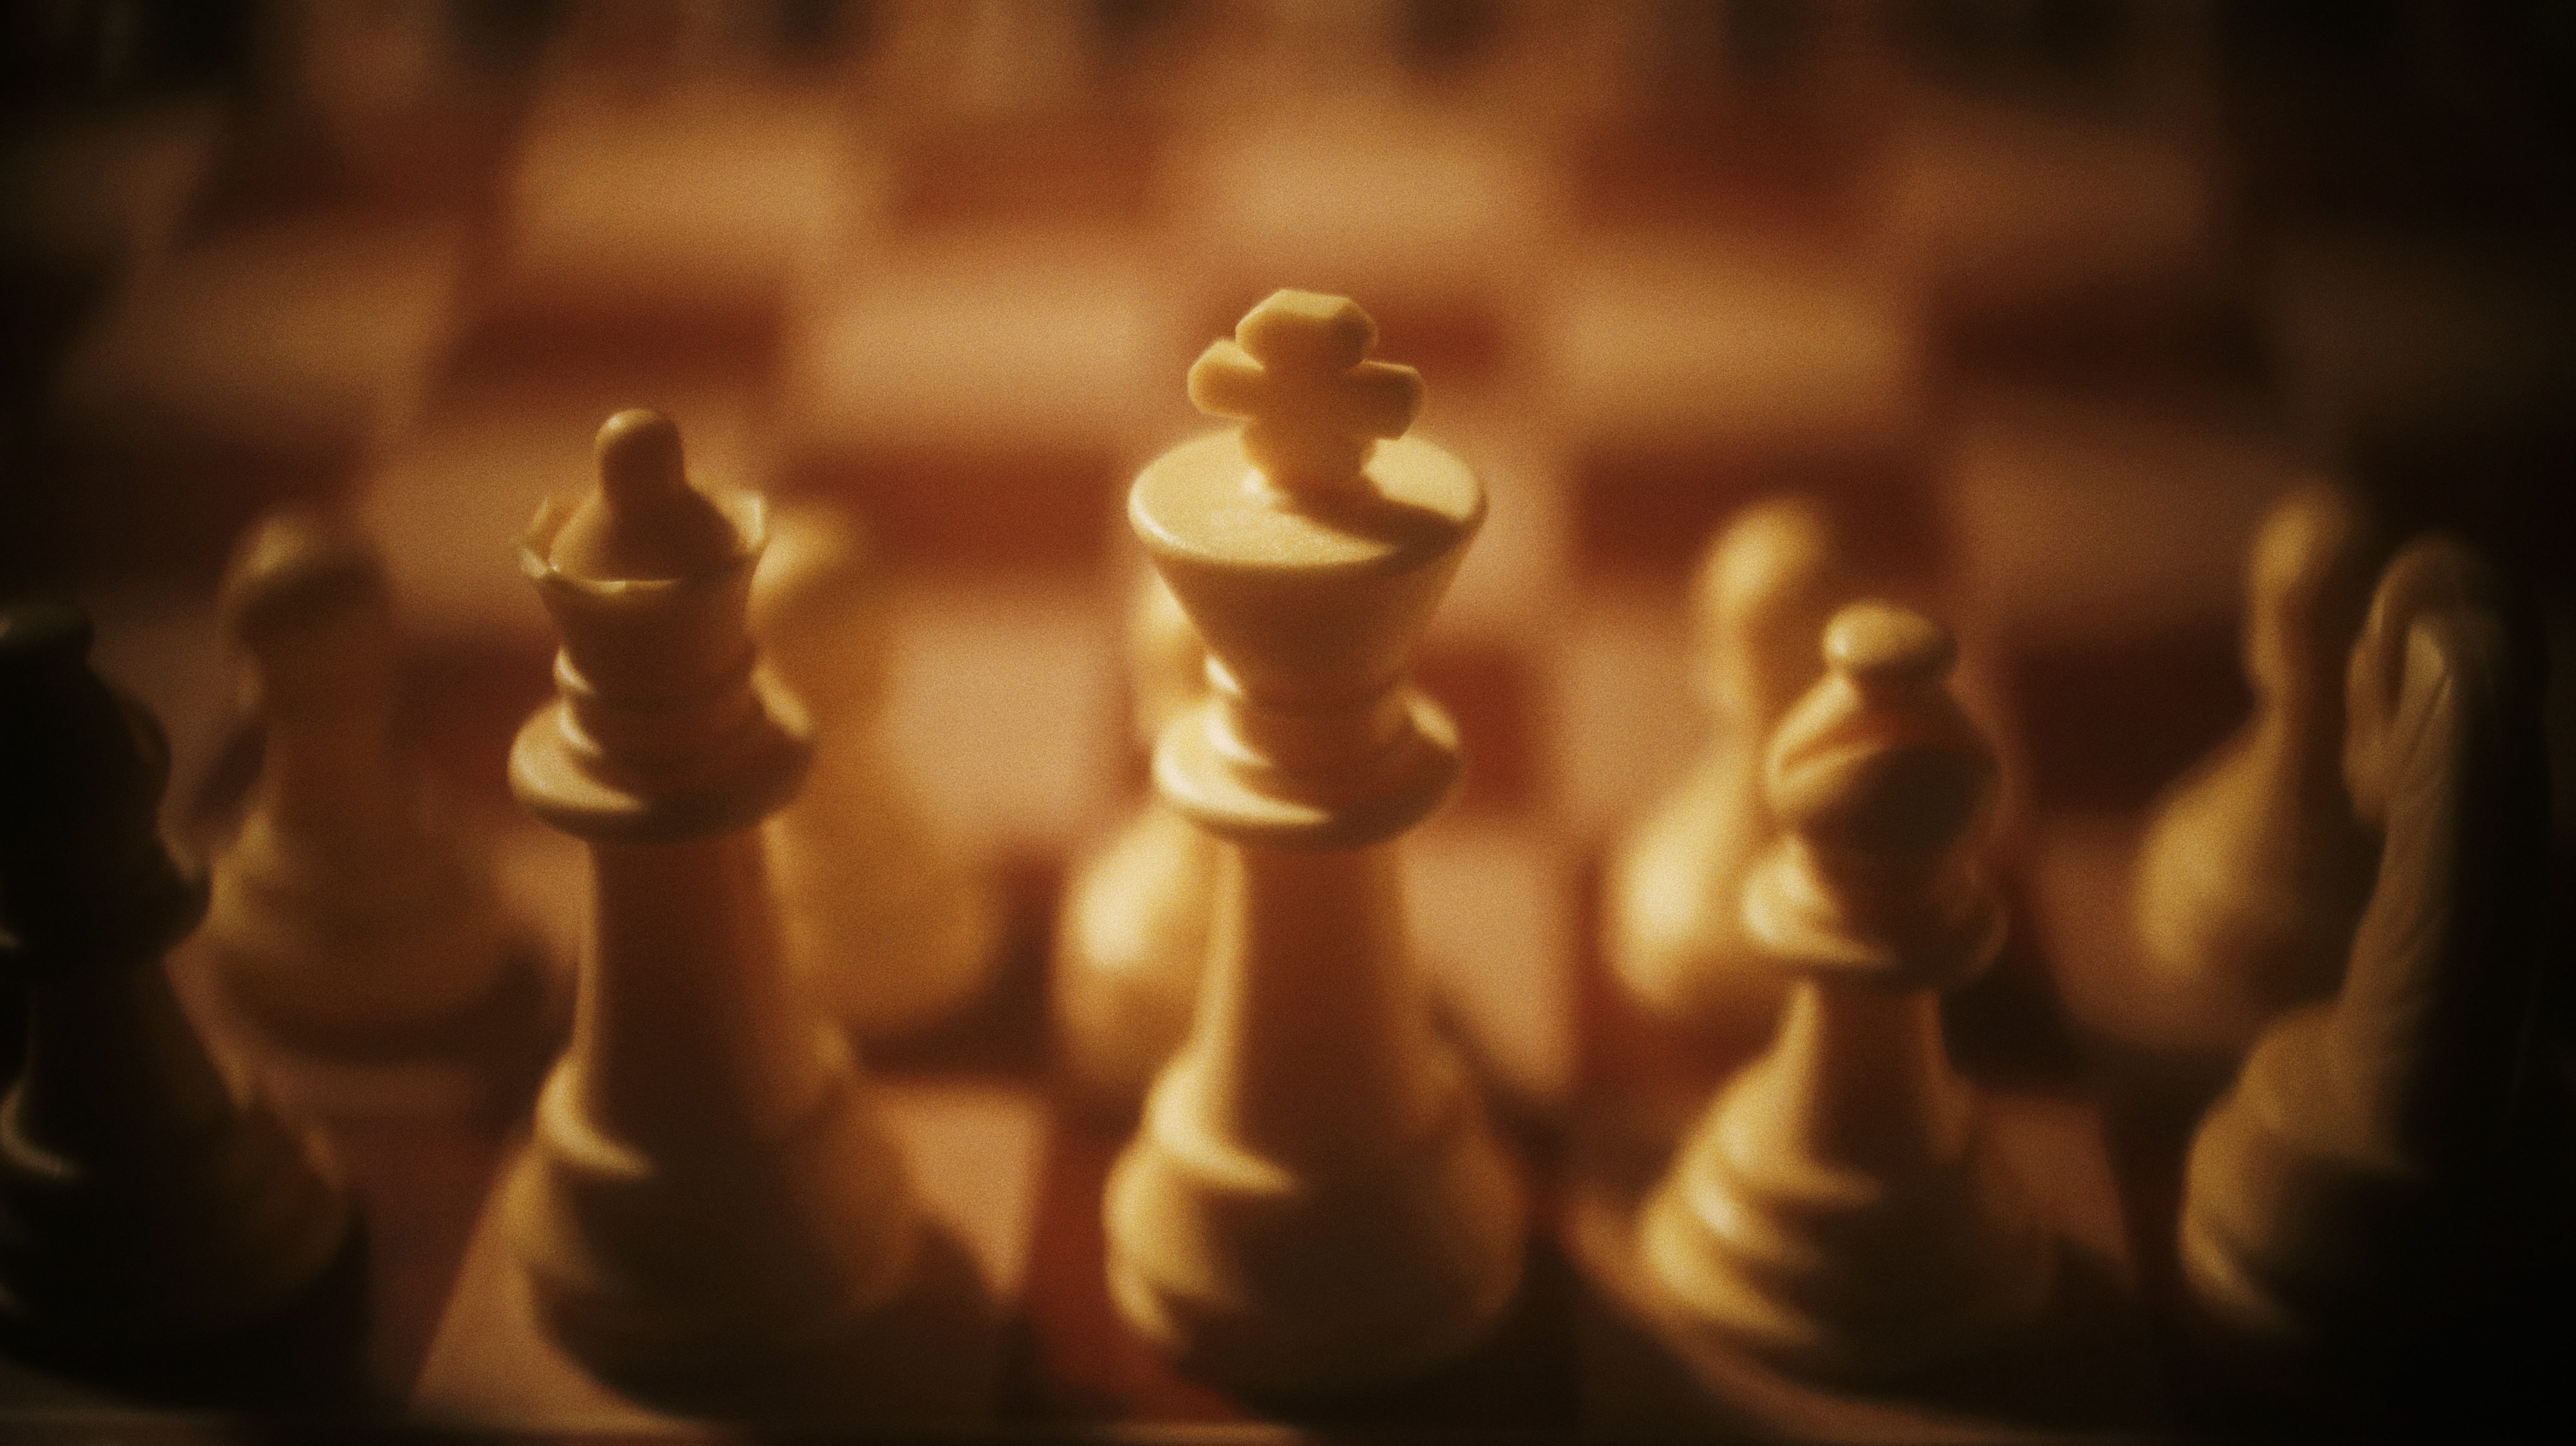 Chess as a Catalyst for Effective Project Management and Leadership